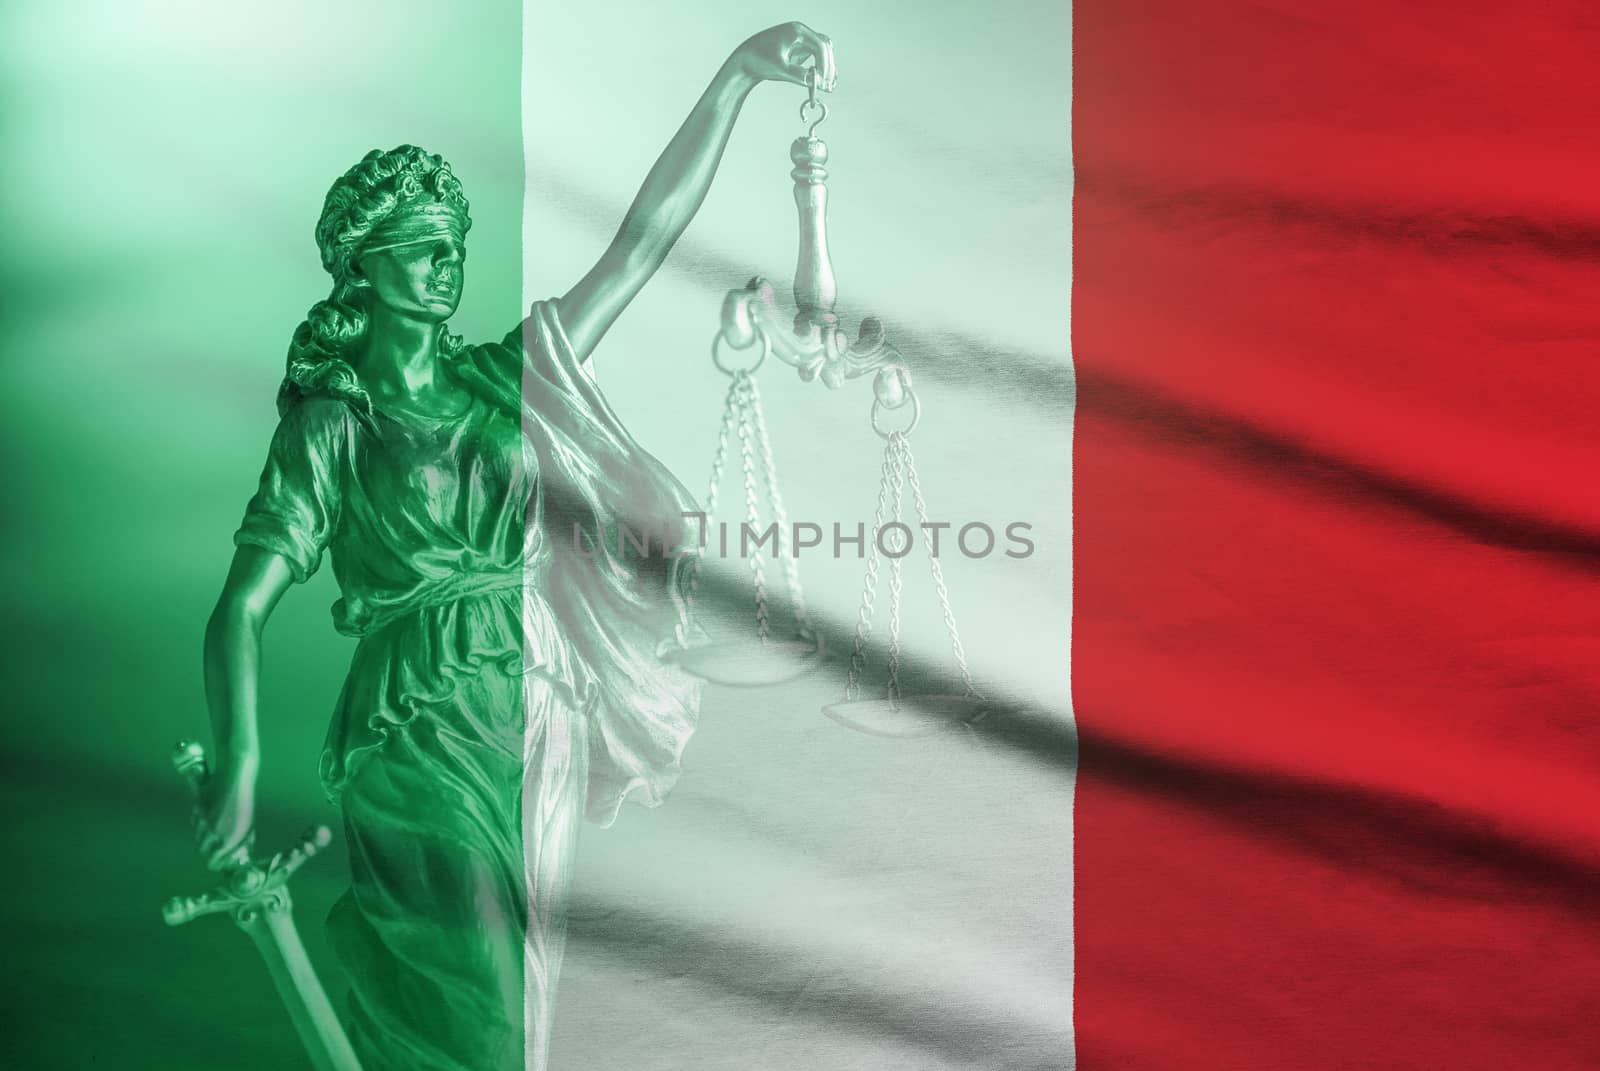 National flag of Italy with statue of Justice holding the scales and sword of law enforcement in a full frame view with copy space